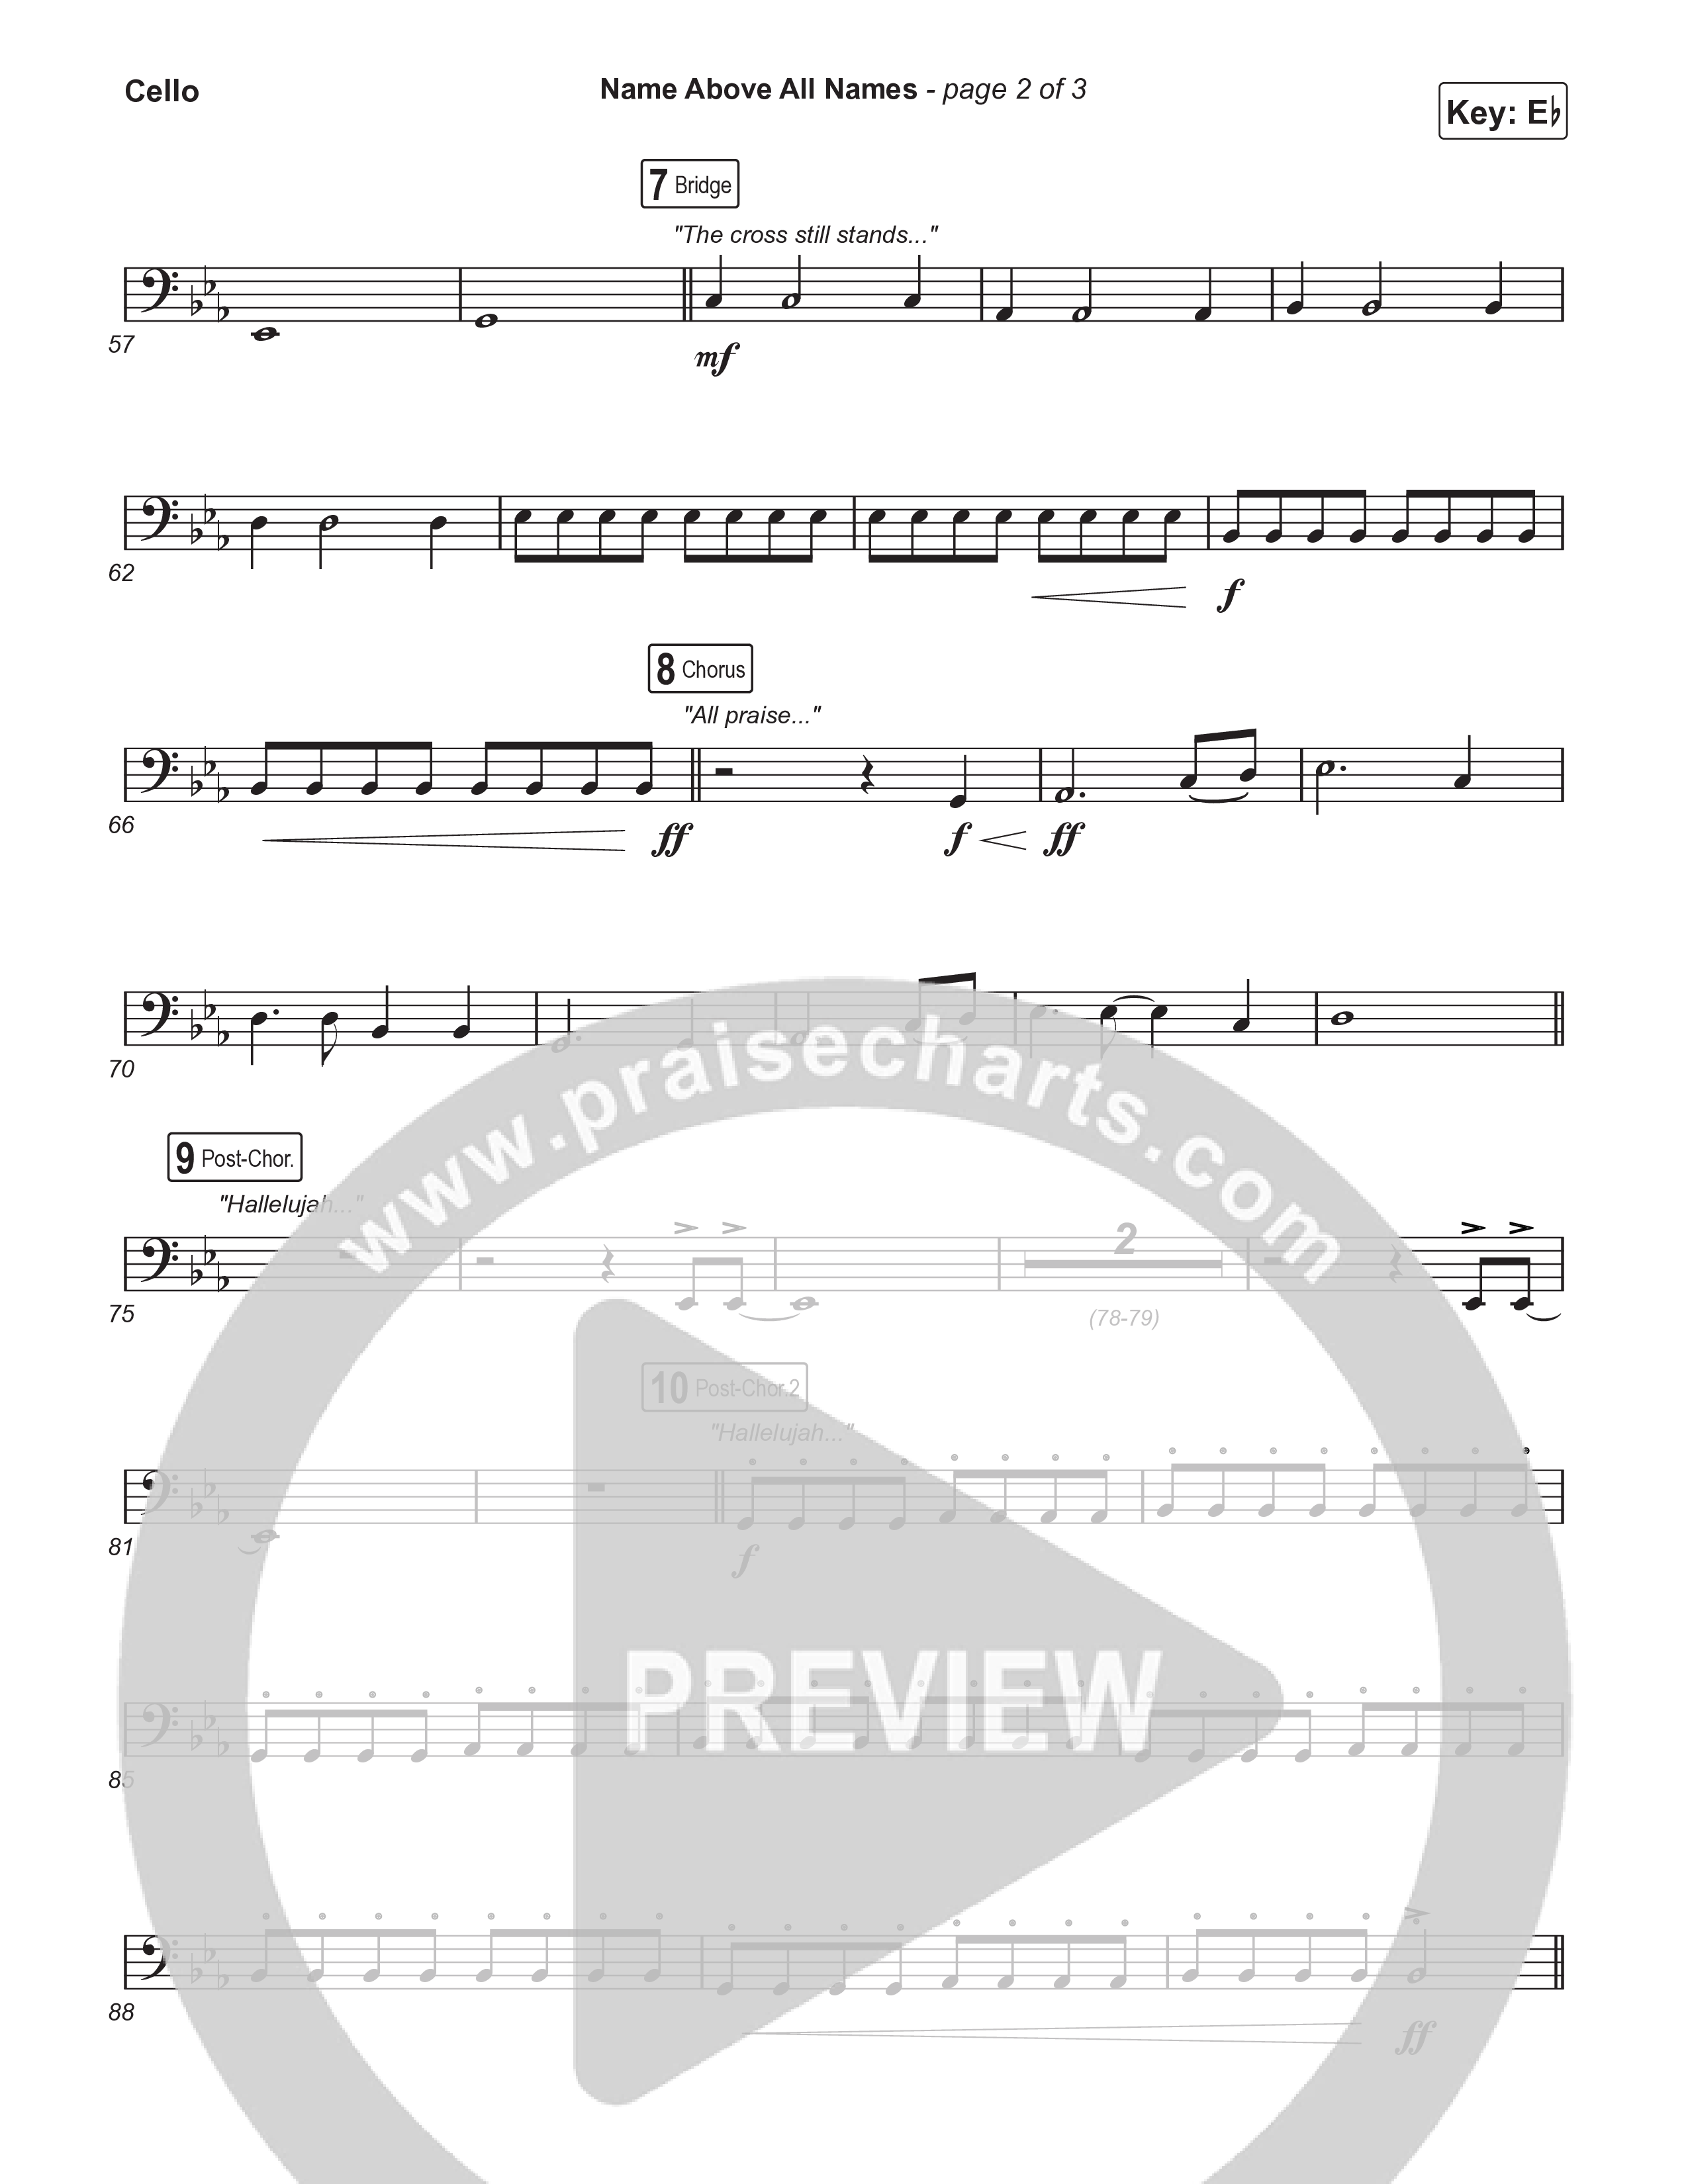 Name Above All Names (Choral Anthem SATB) Cello (Charity Gayle / Arr. Luke Gambill)